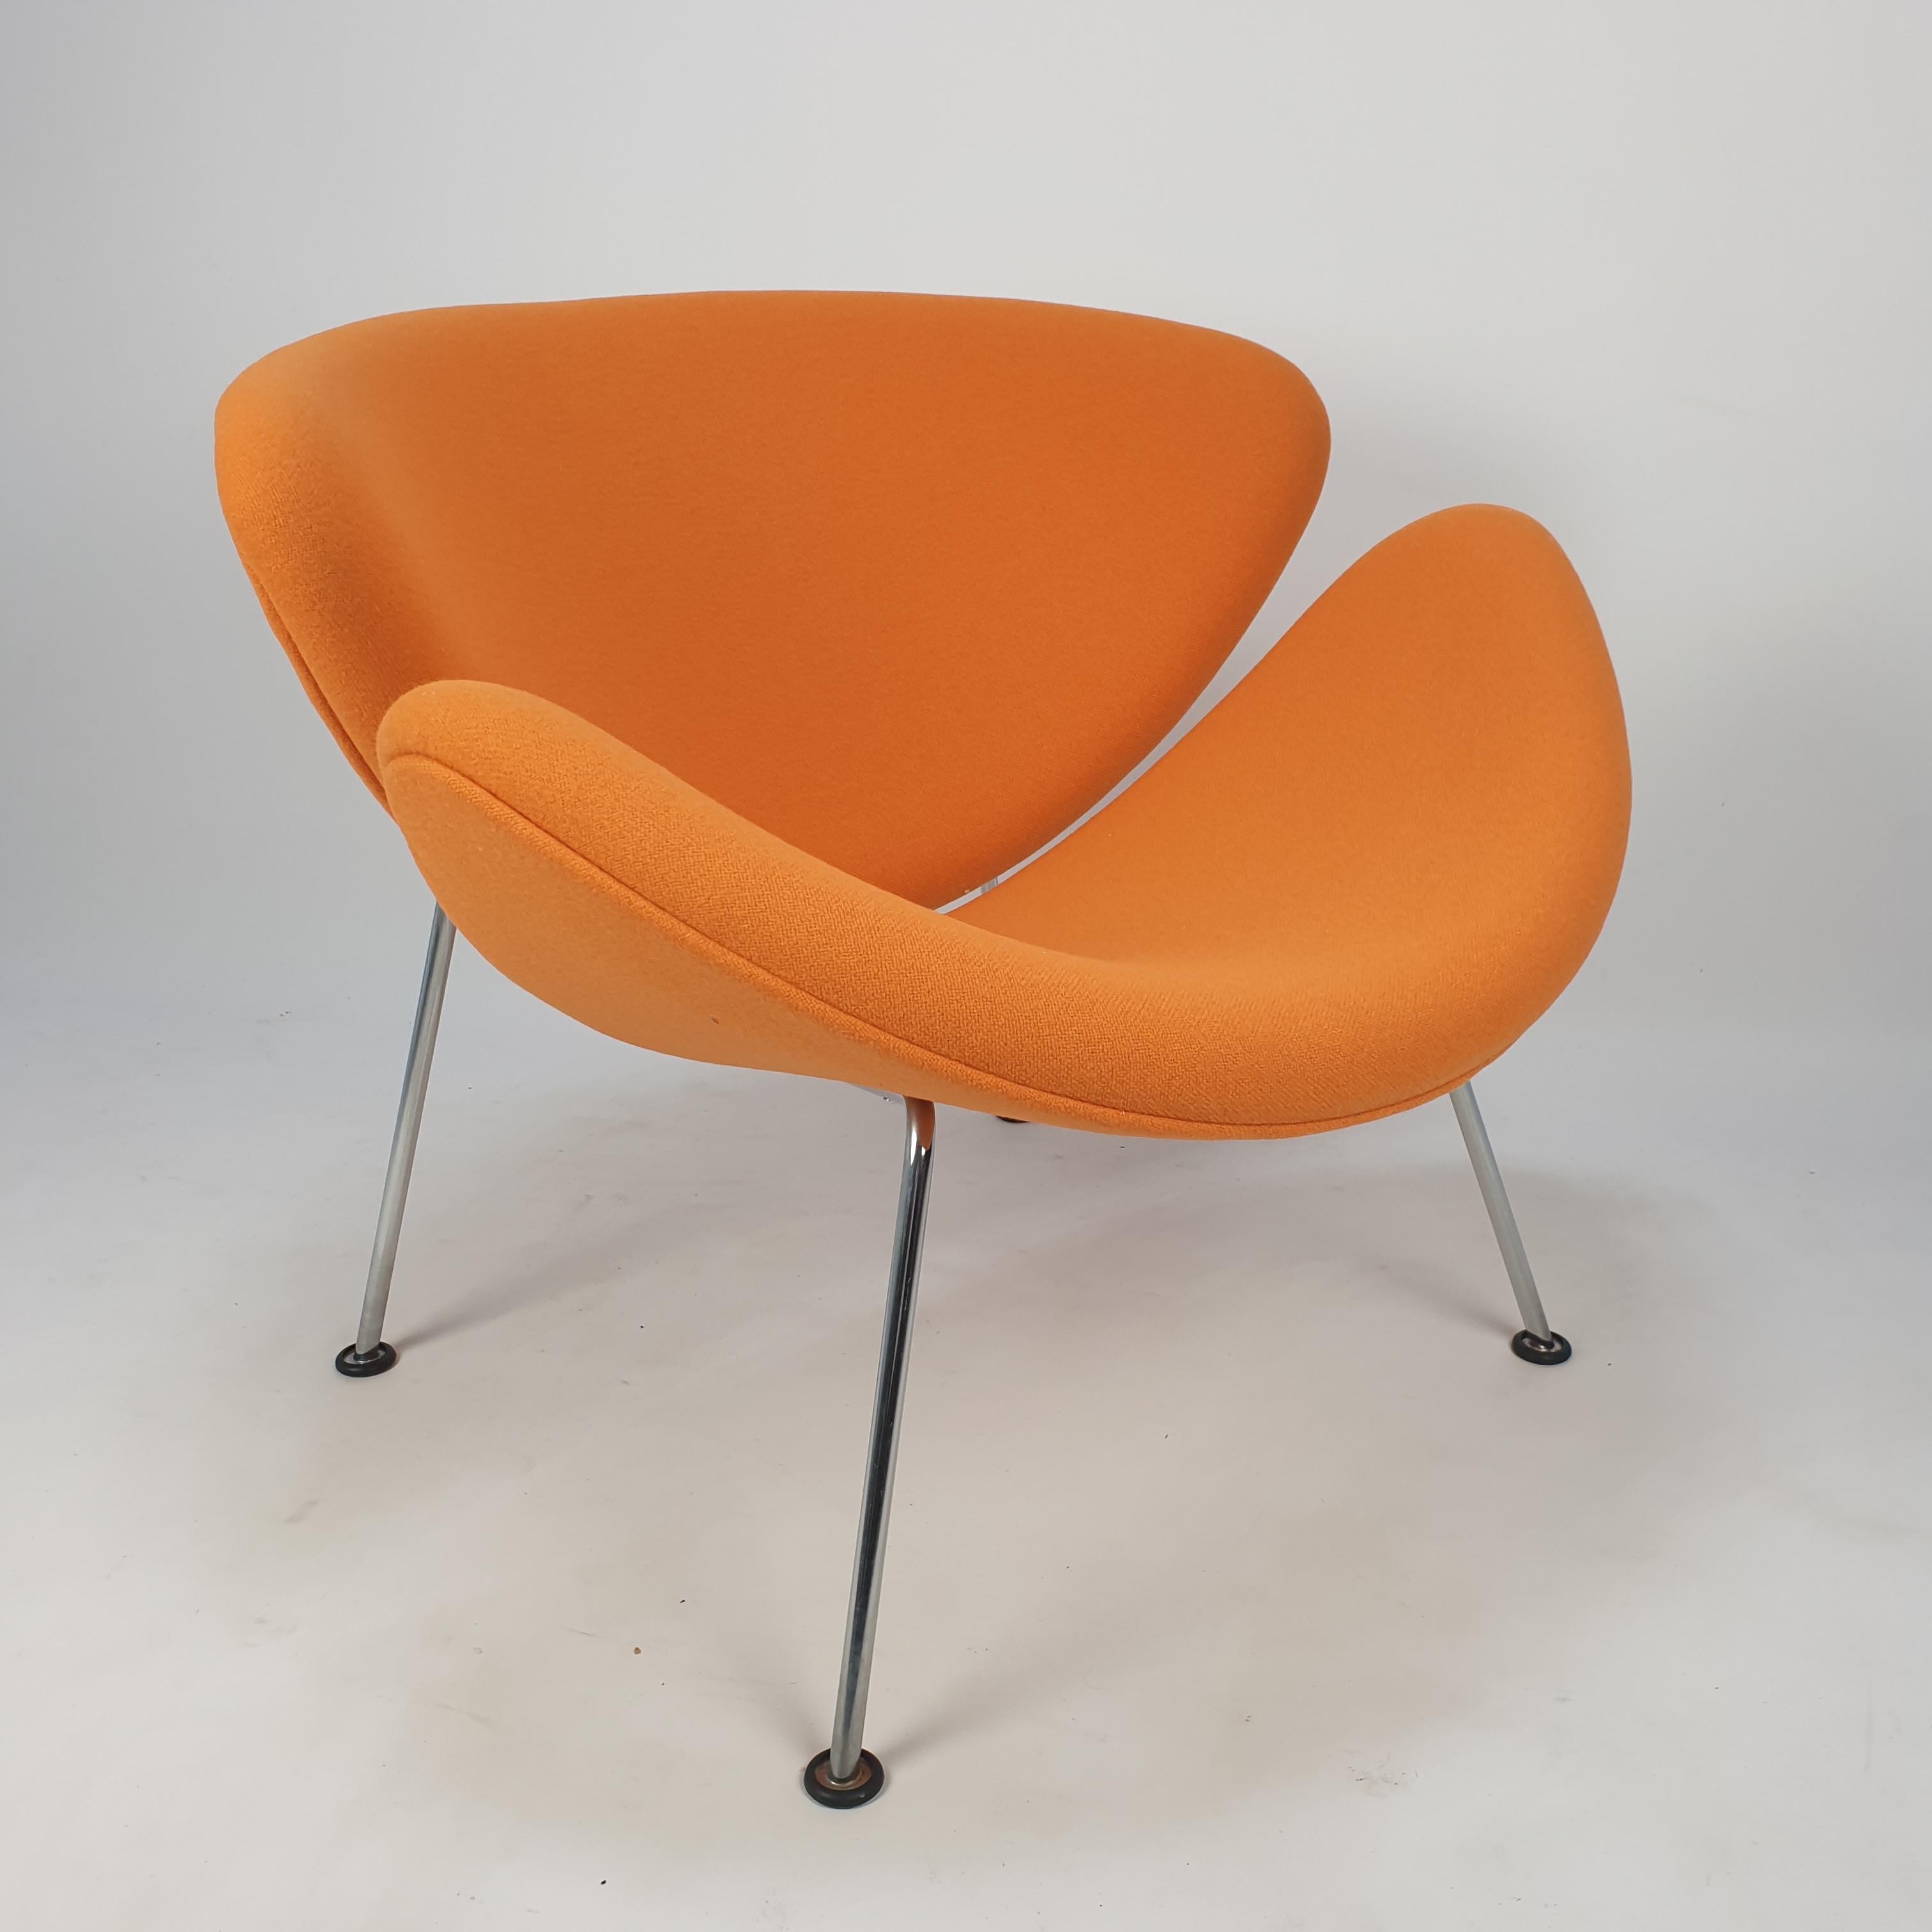 The famous Artifort orange slice chair by Pierre Paulin. Designed in the 60's and produced in the 80's. Cute and very comfortable chair. It has chrome metal legs. The structure is in very good condition. The chair has new foam and has just been